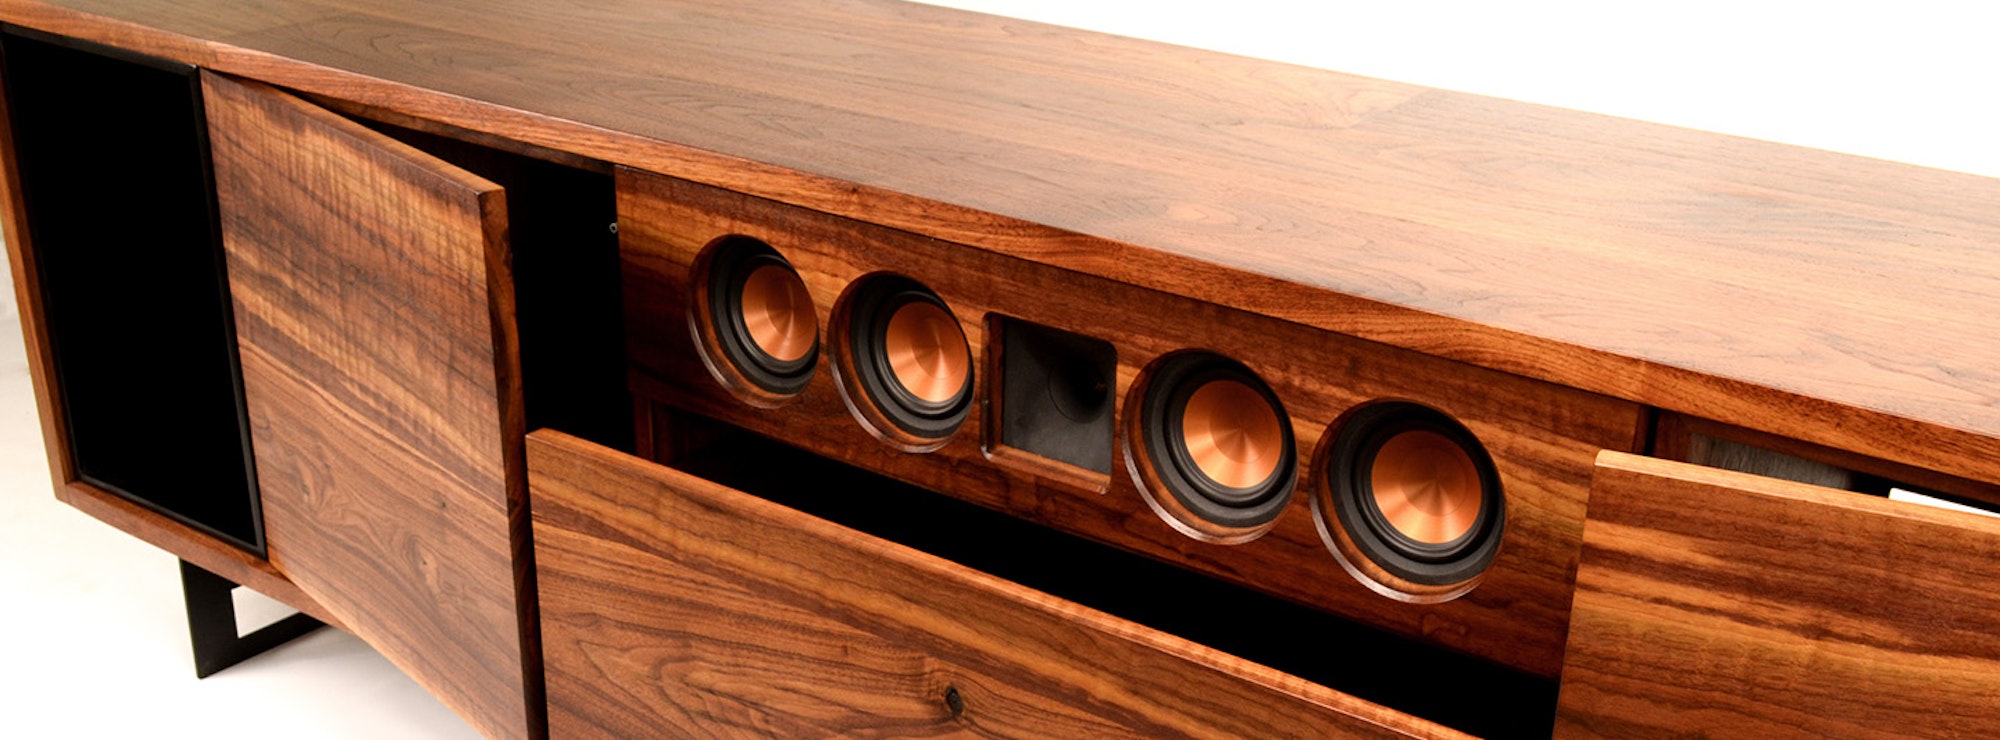 Custom built cabinet for Klipsch speakers in a home theater